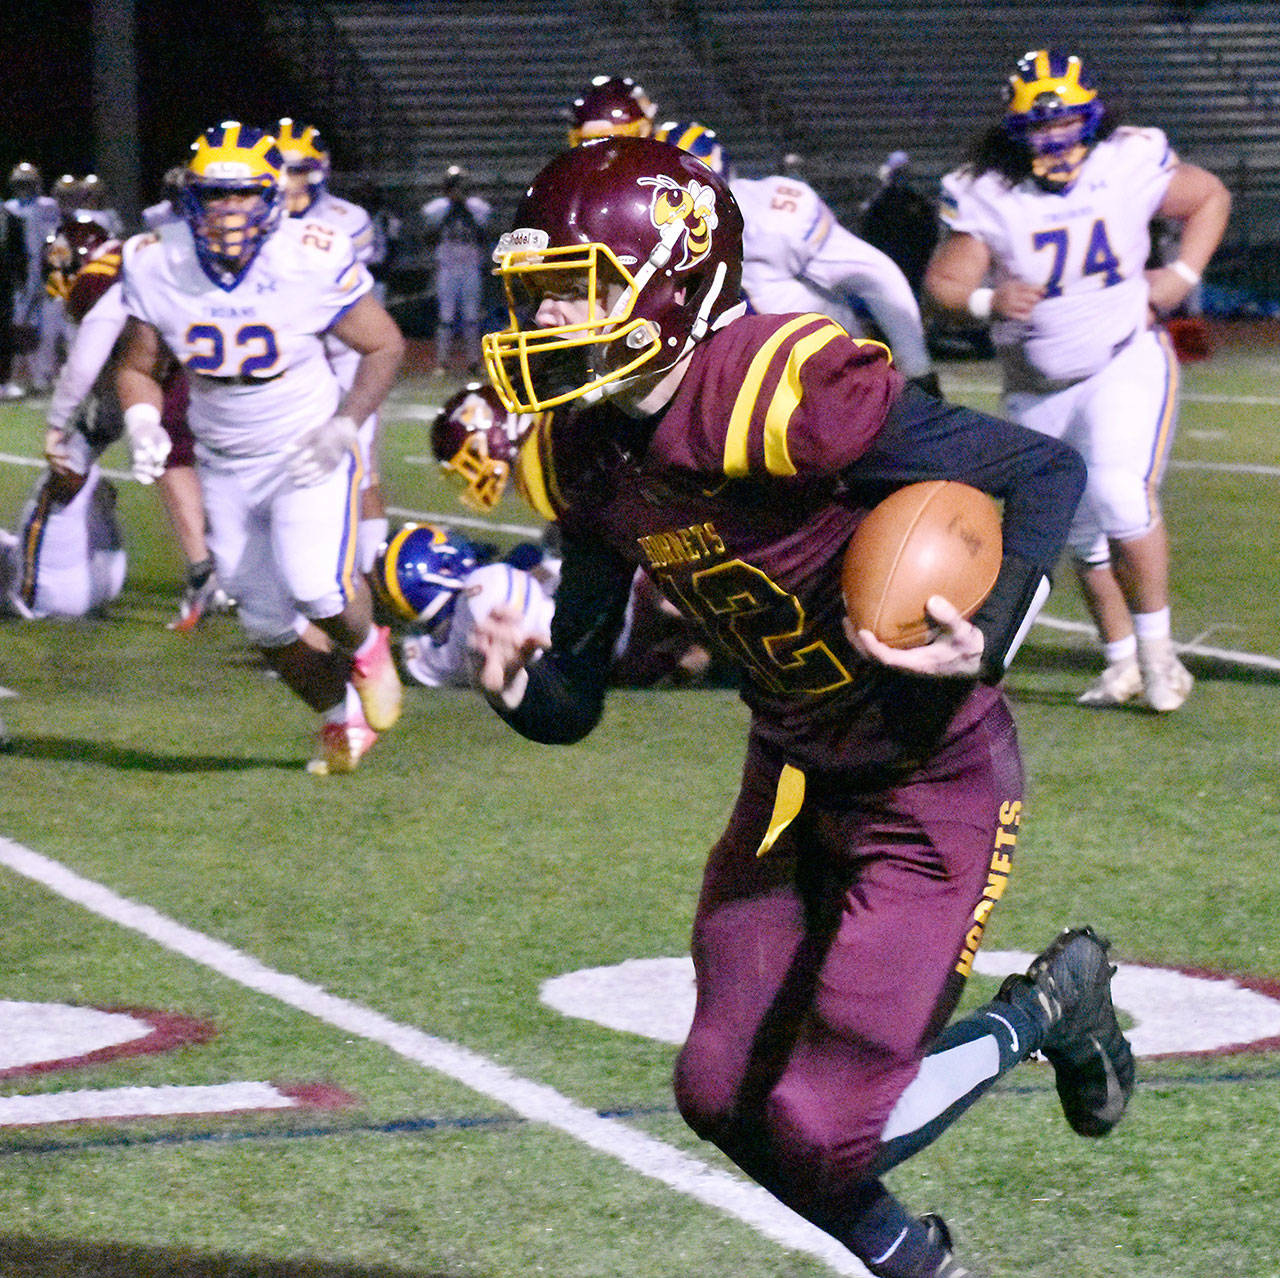 White River’s offense received a second-half spark from quarterback Yaz Metzenberg, shown here running for a first down. Photo by Kevin Hanson